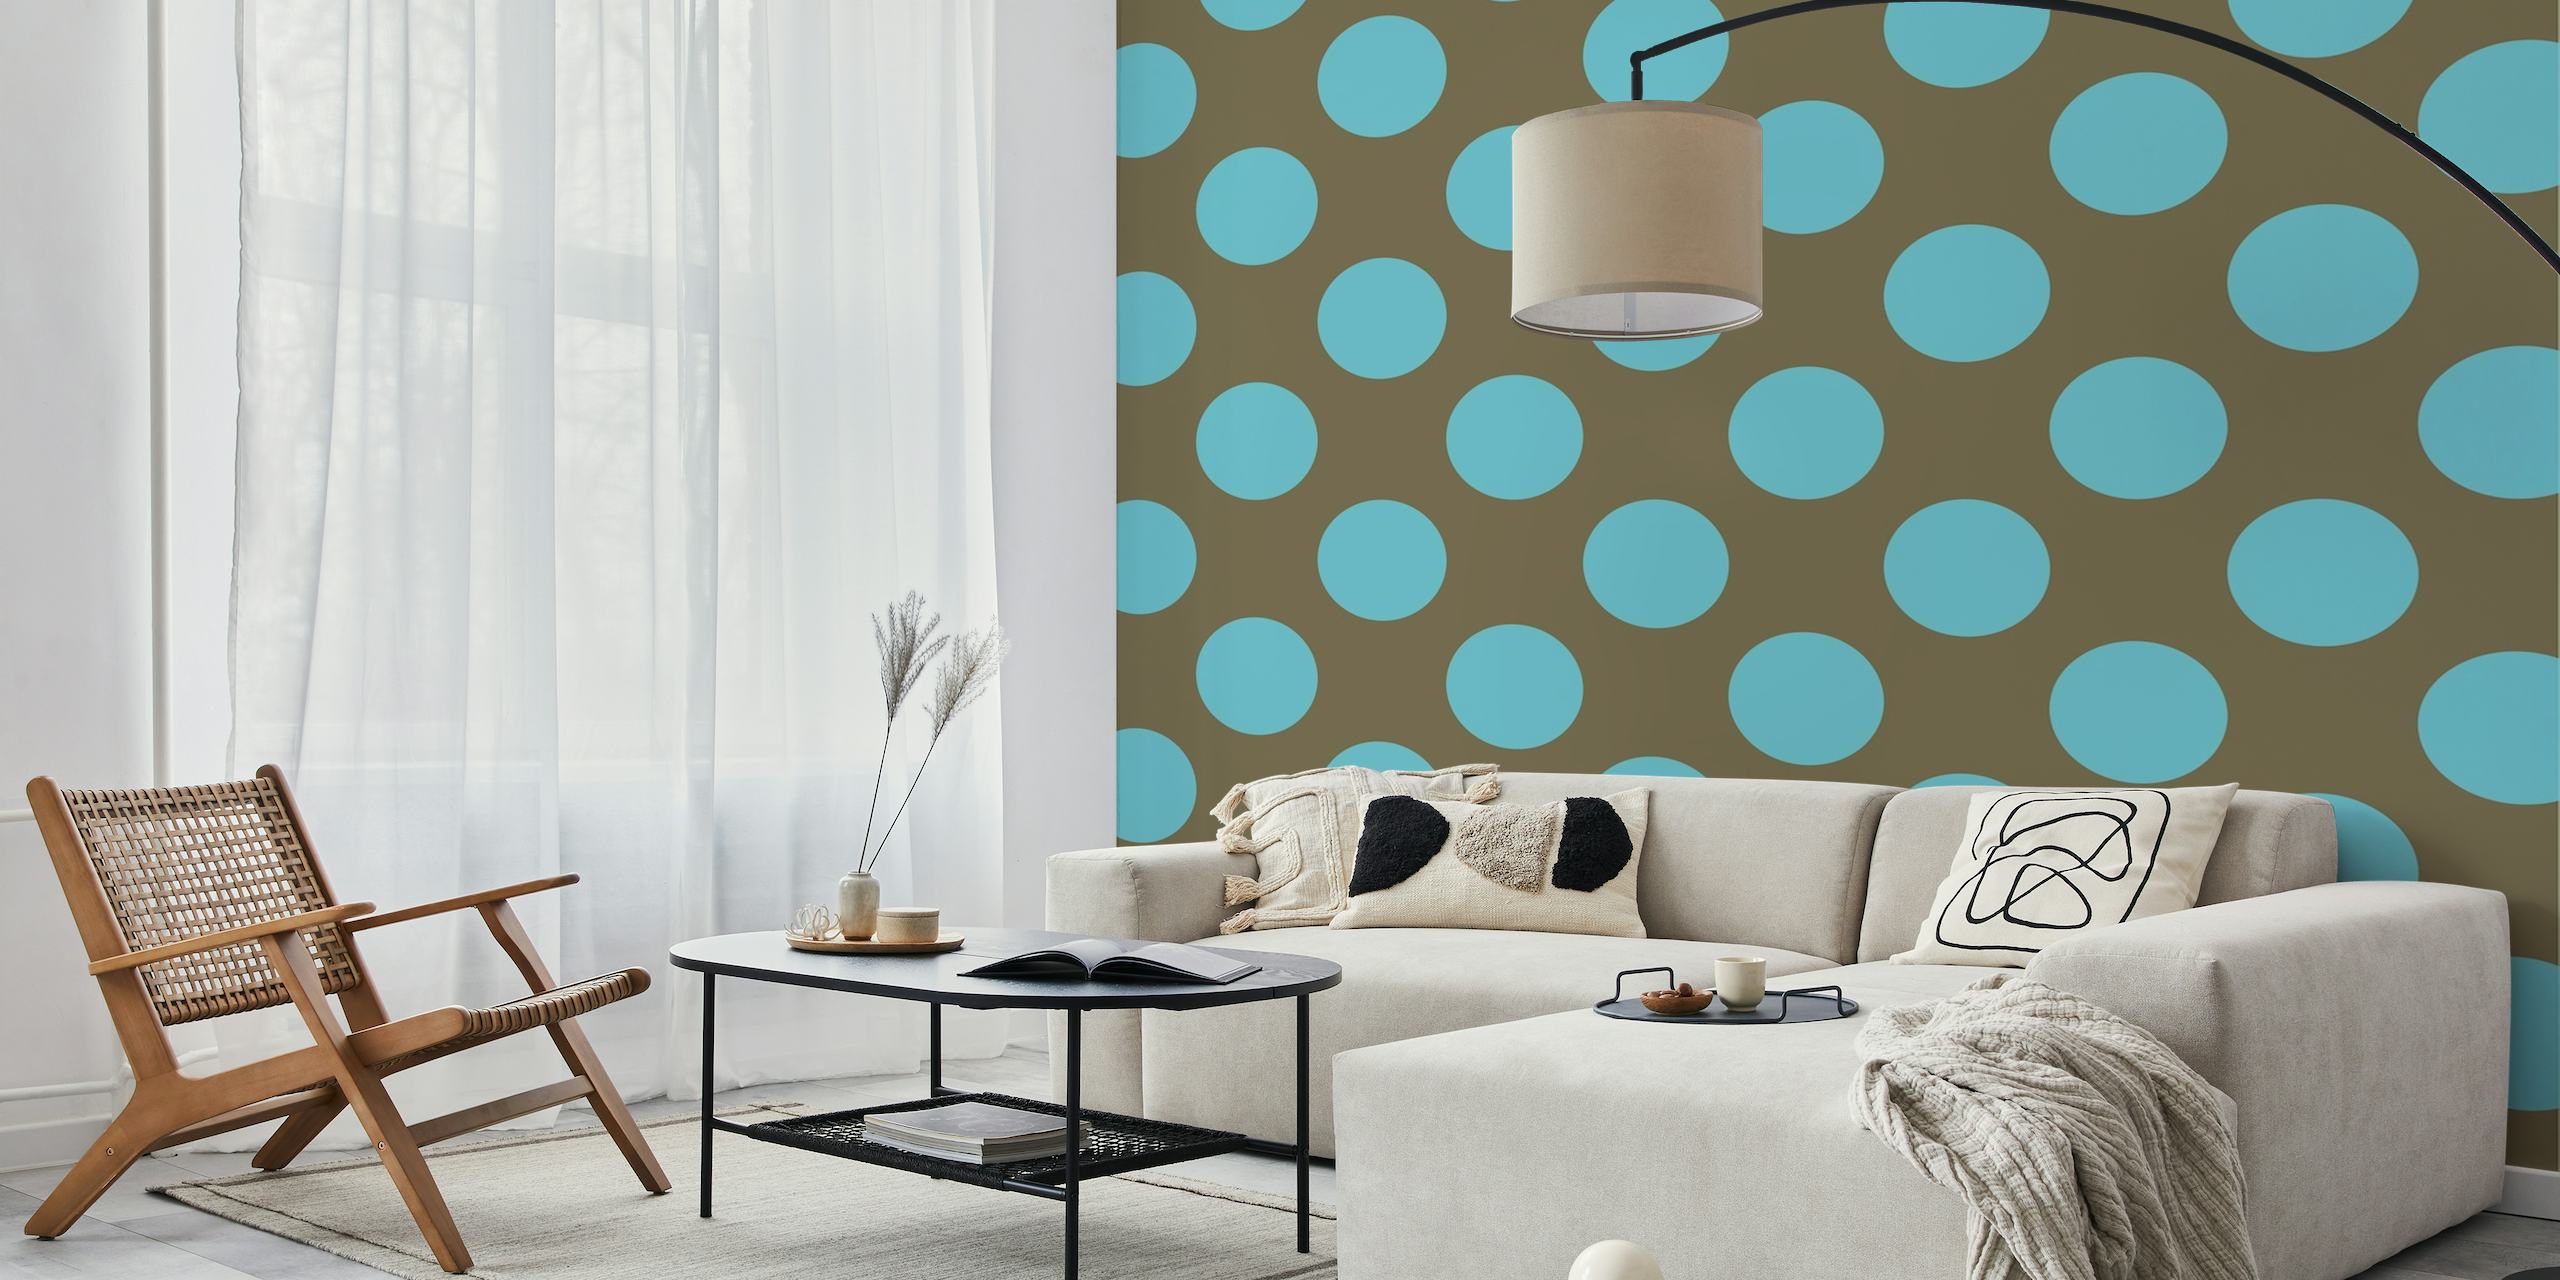 Brown Turquoise polka dotted art wallpaper